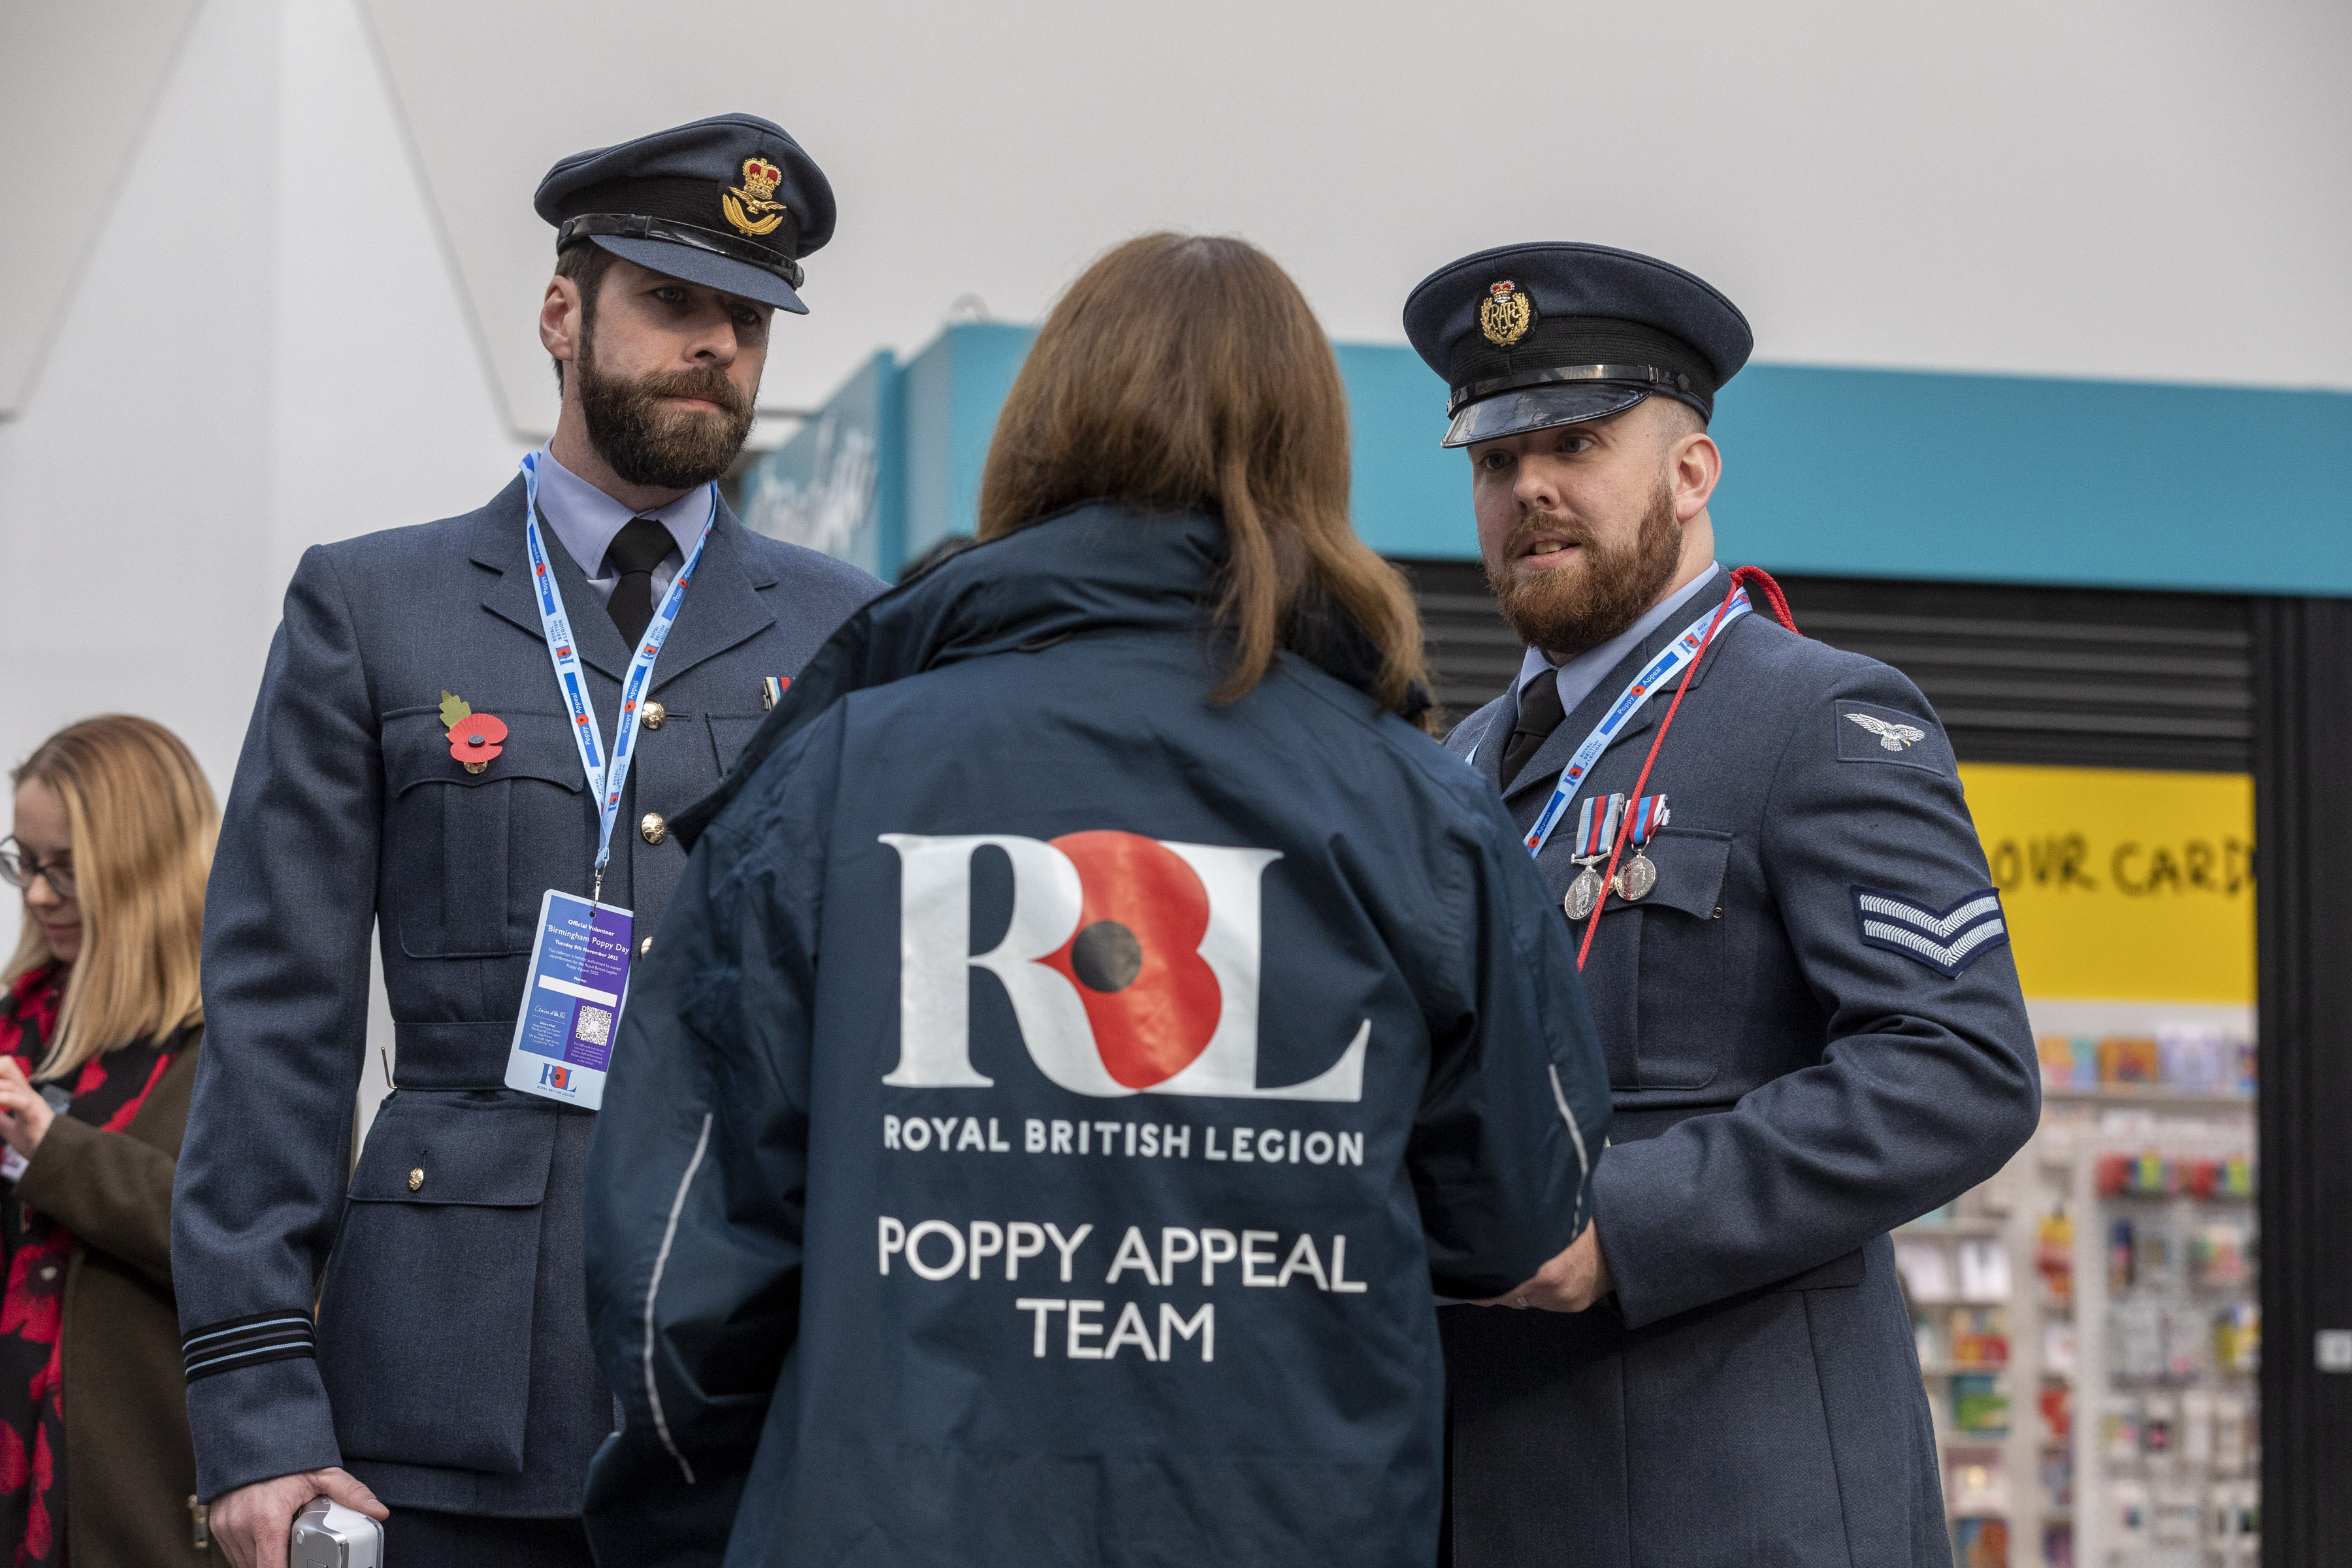 Image shows RAF aviators and Royal British Legion worker in shopping centre.